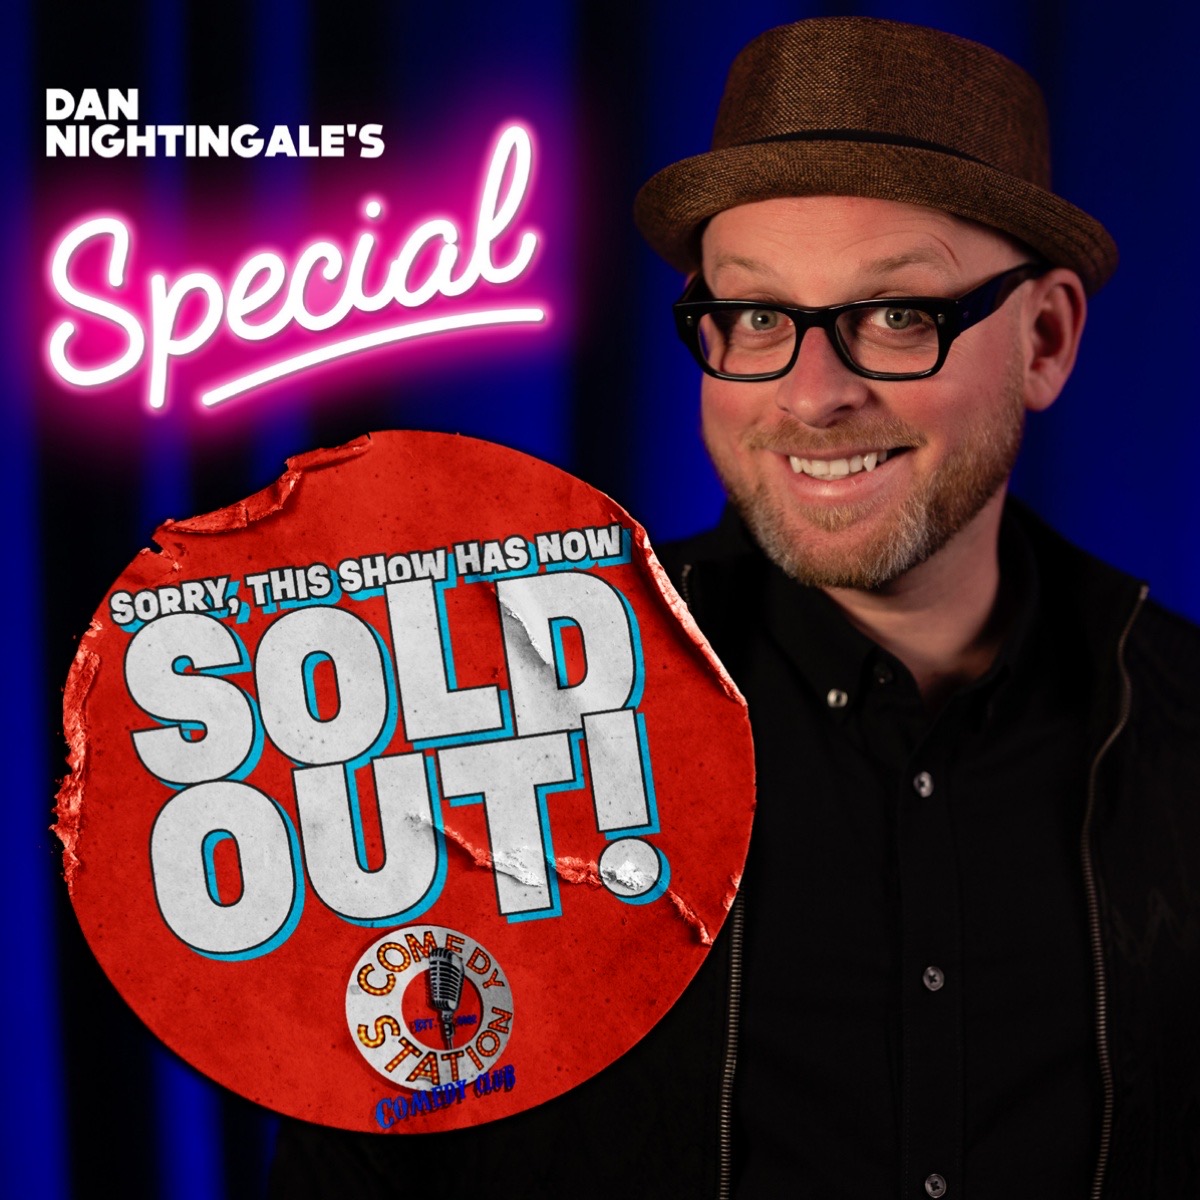 Dan Nightingale: Dan Nightingale’s Special, Blackpool, 12th October 2023. Sold out!